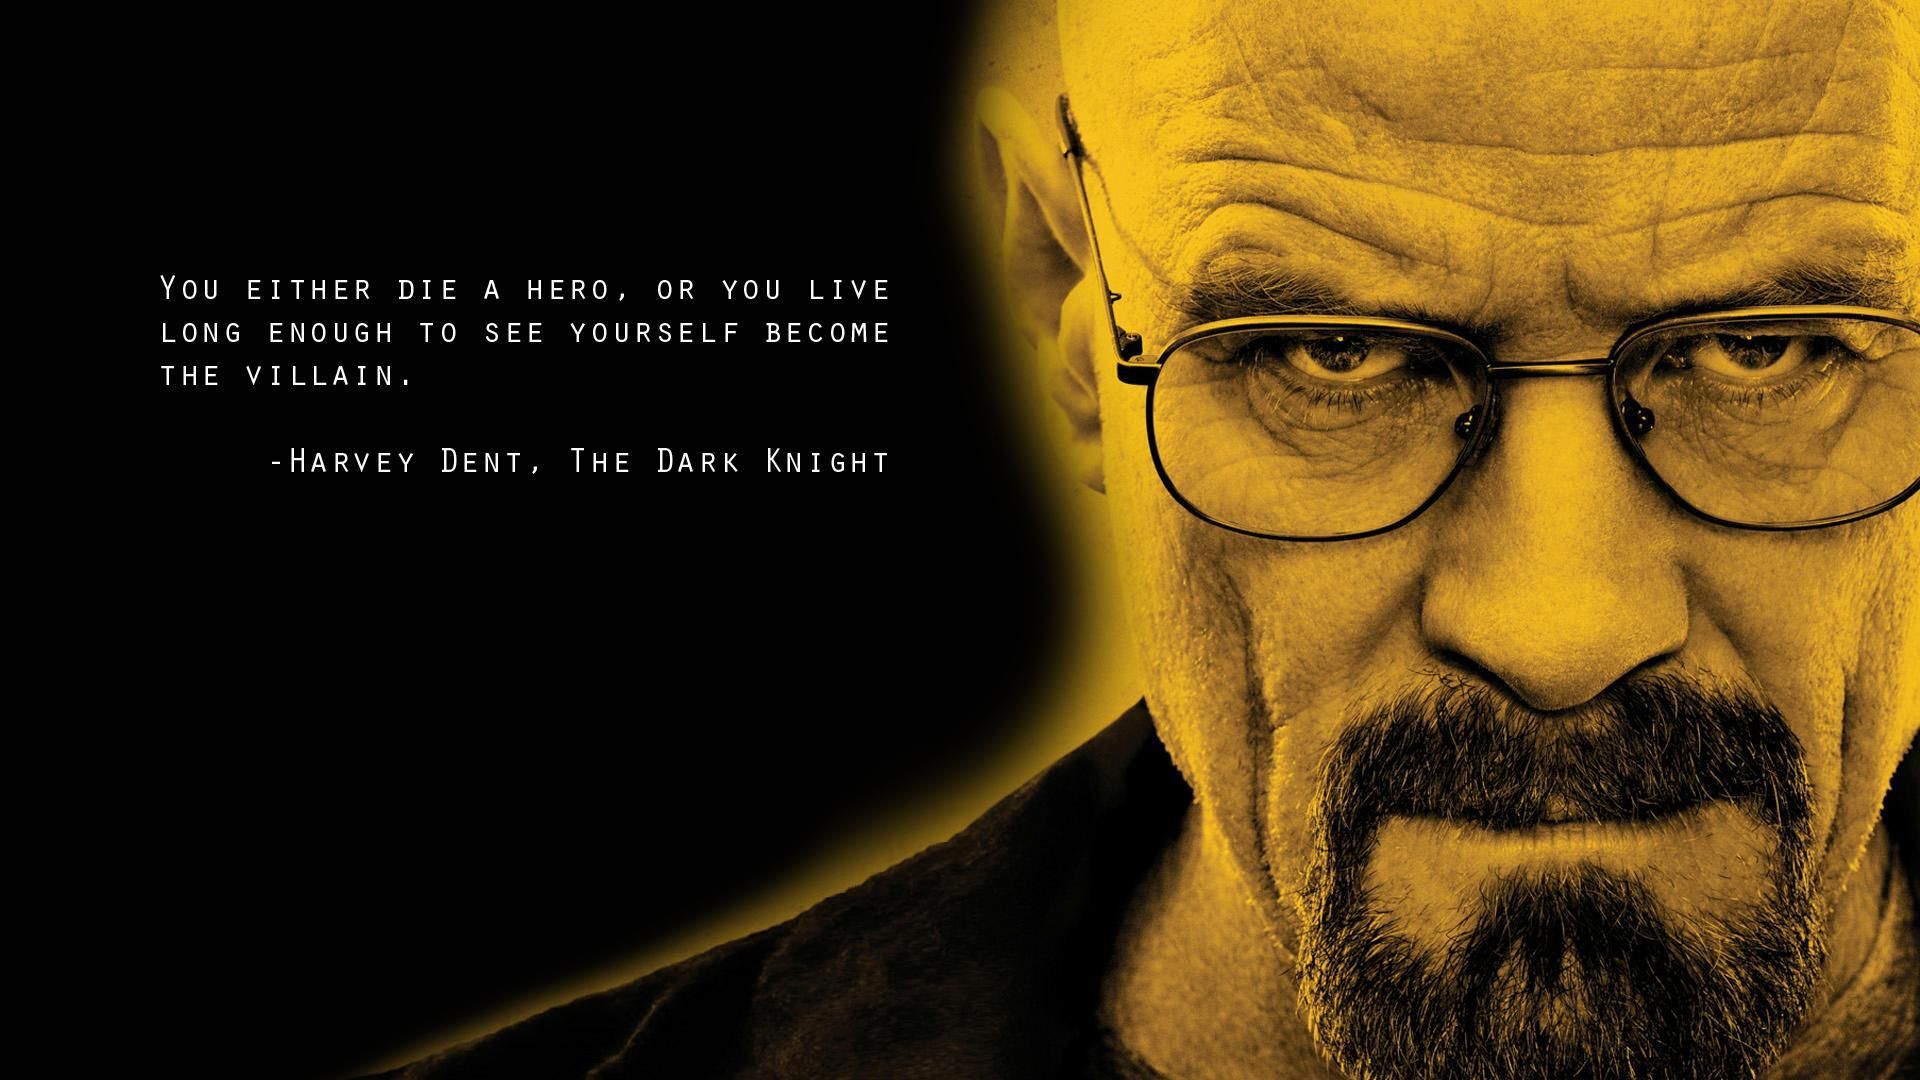 Mind Blowing Movie Quotes. Best movie quotes, Movie quotes, Wallpaper quotes